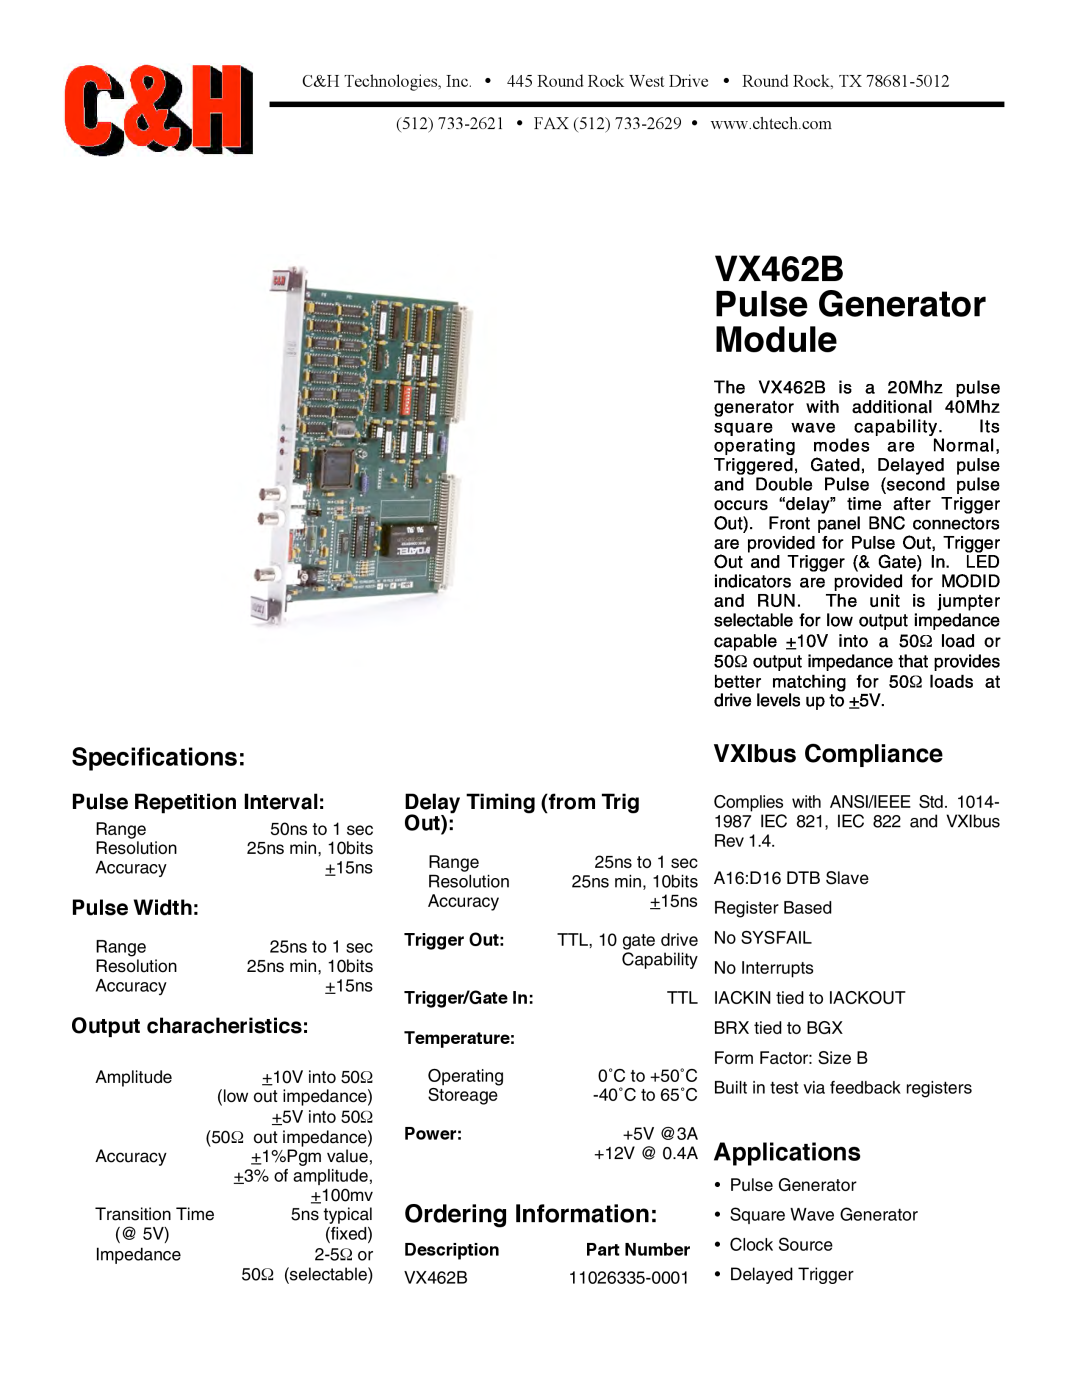 CH Tech specifications VX462B Pulse Generator Module, Specifications, Ordering Information, Applications, Pulse Width 